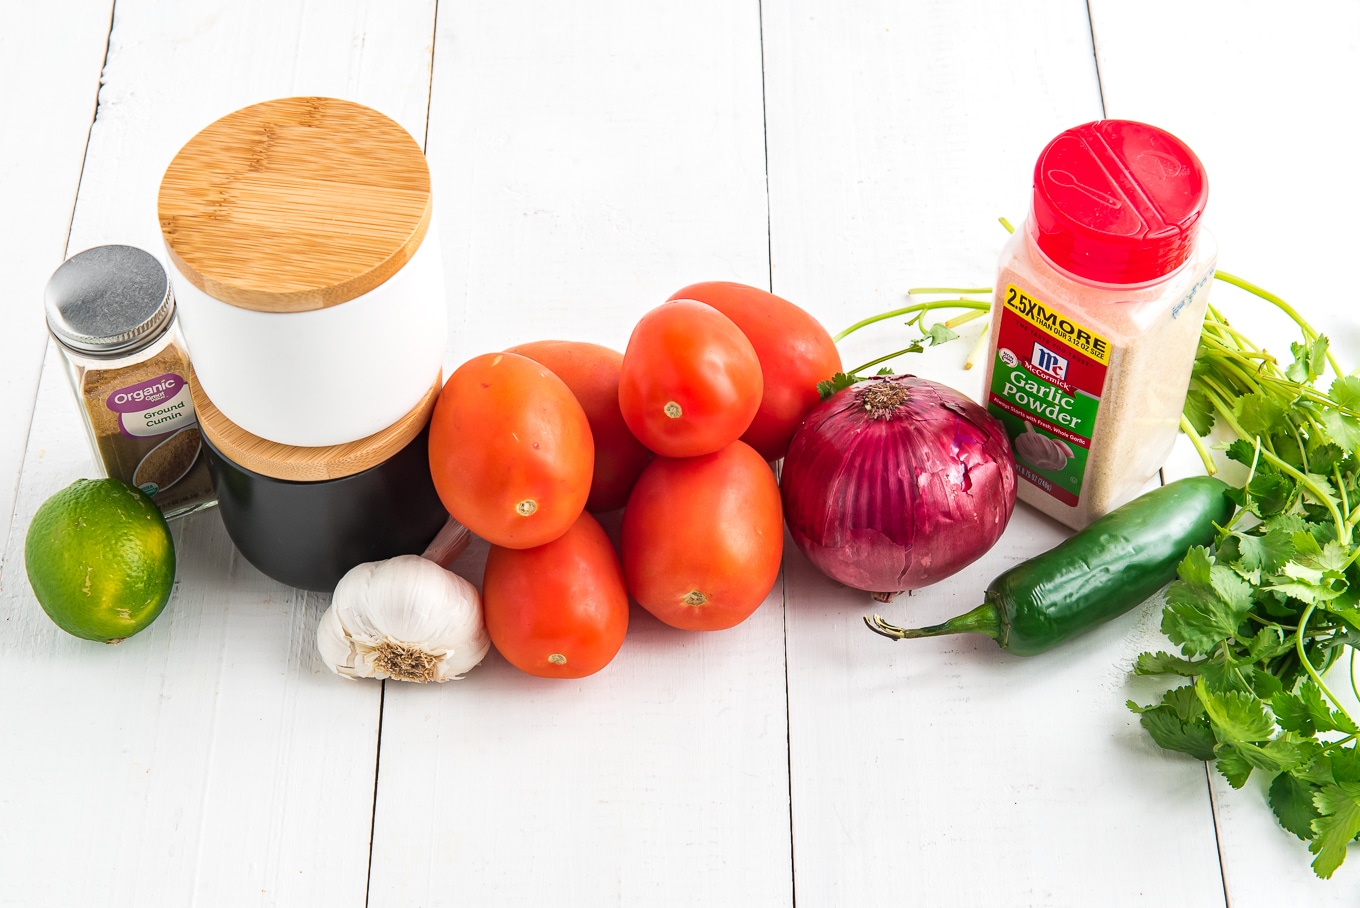 Ingredients to fresh salsa on the table.